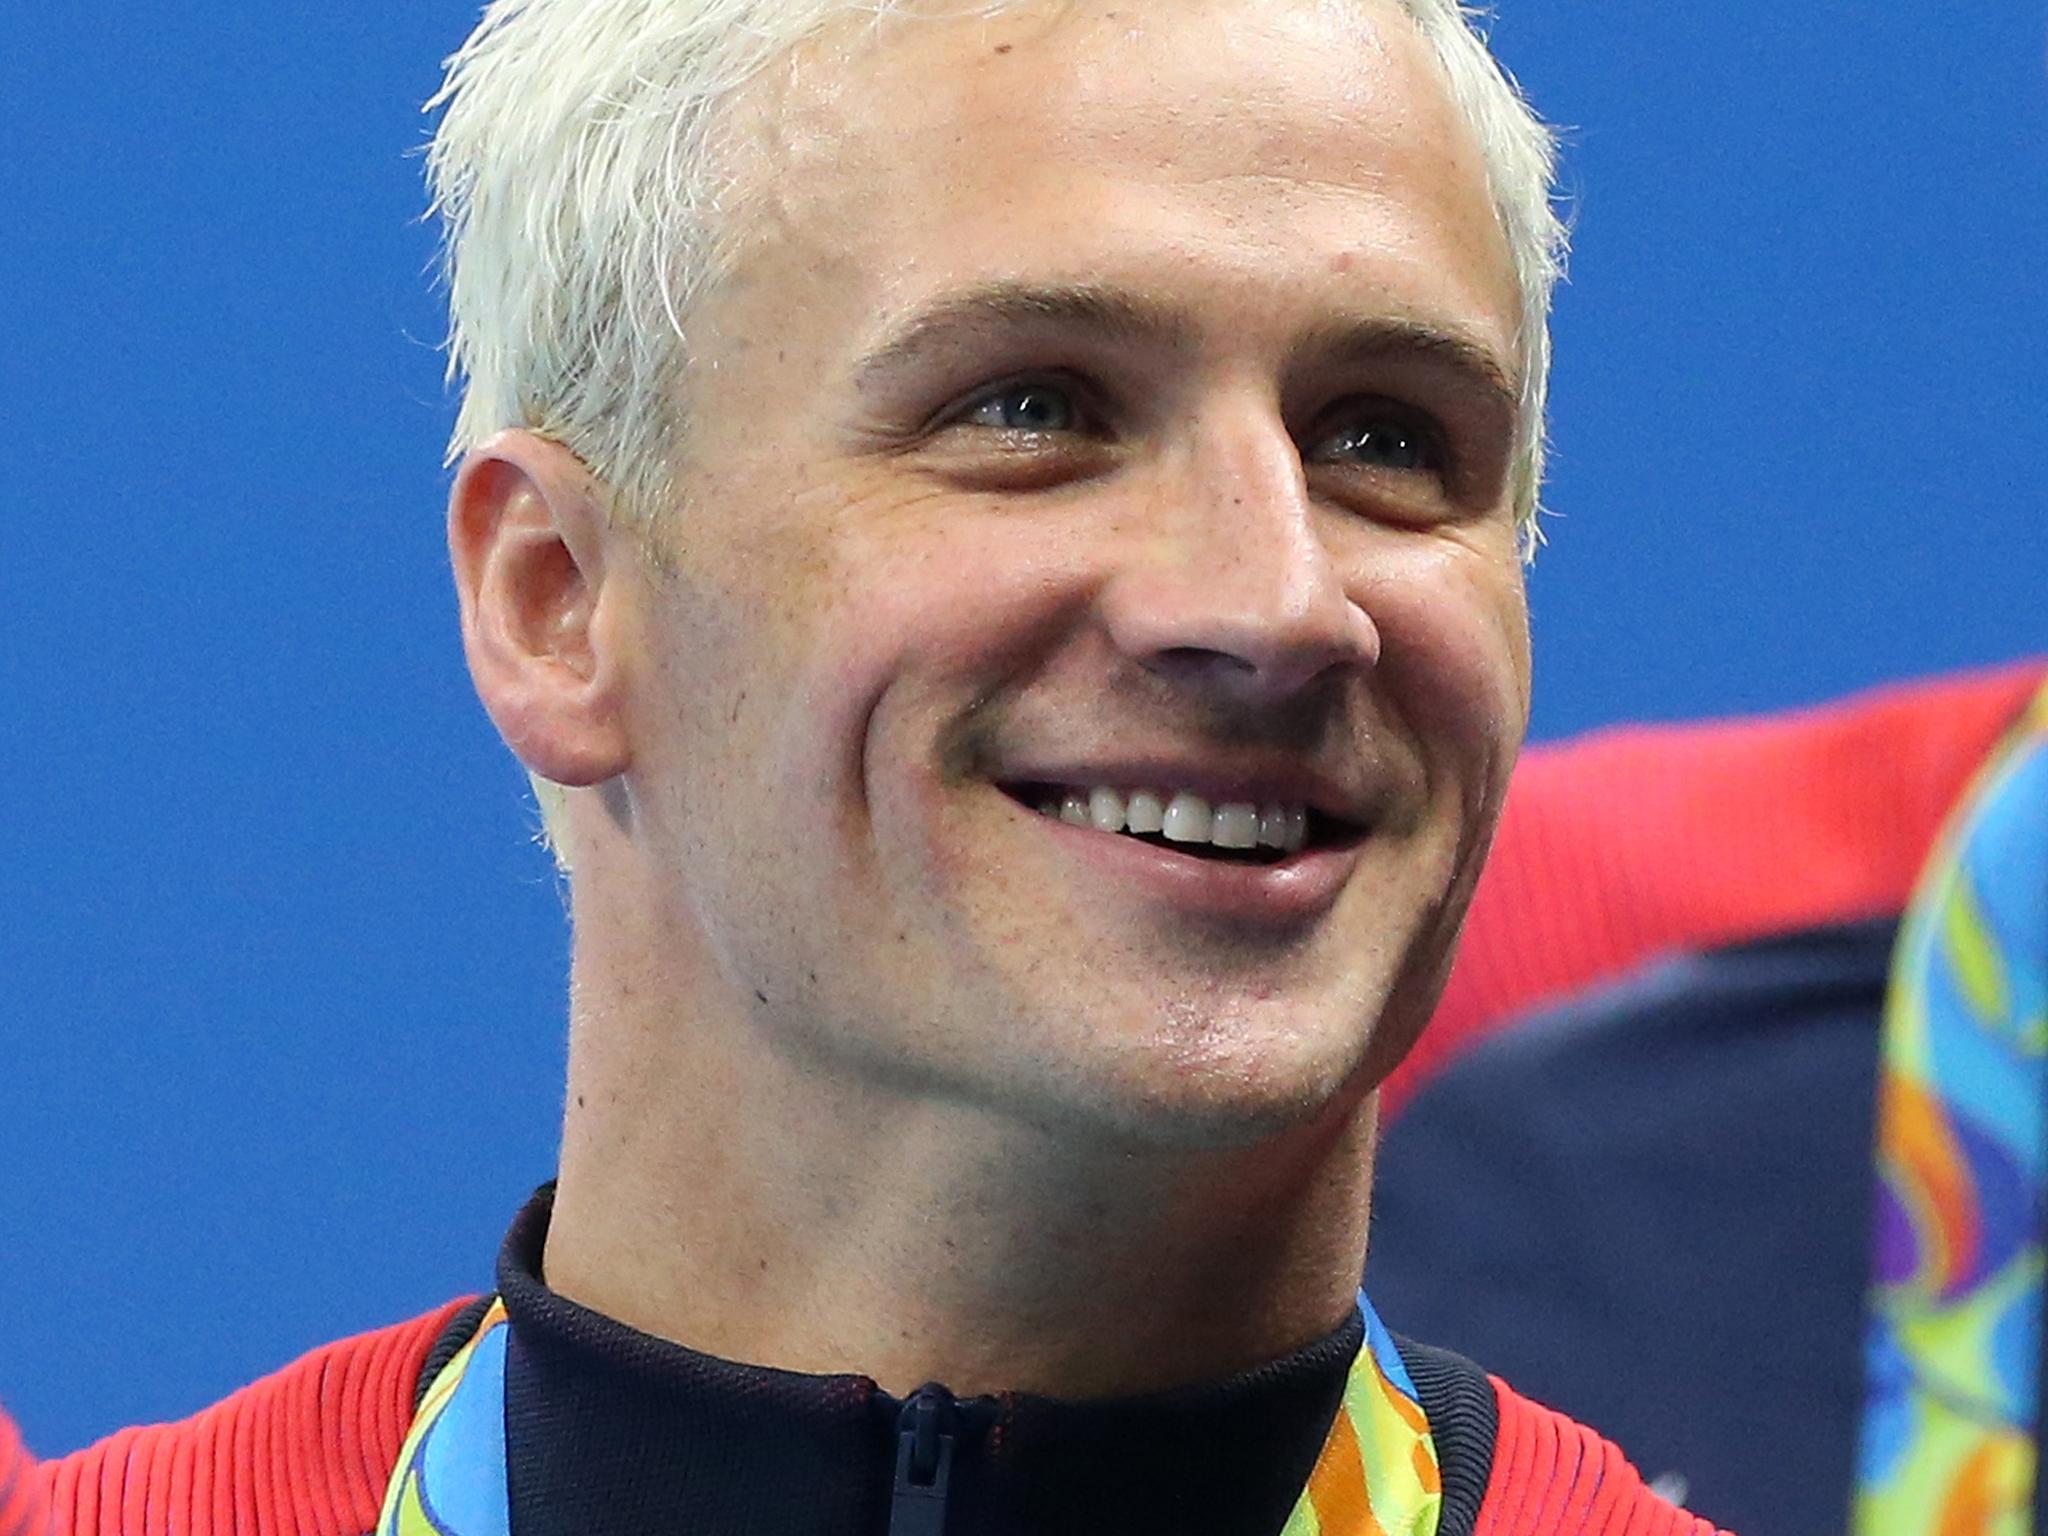 Ryan Lochte of Team USA celebrates winning the gold medal during the medal ceremony of the men's 200m freestyle relay on day 4 of the Rio 2016 Olympic Games at Olympic Aquatics Stadium